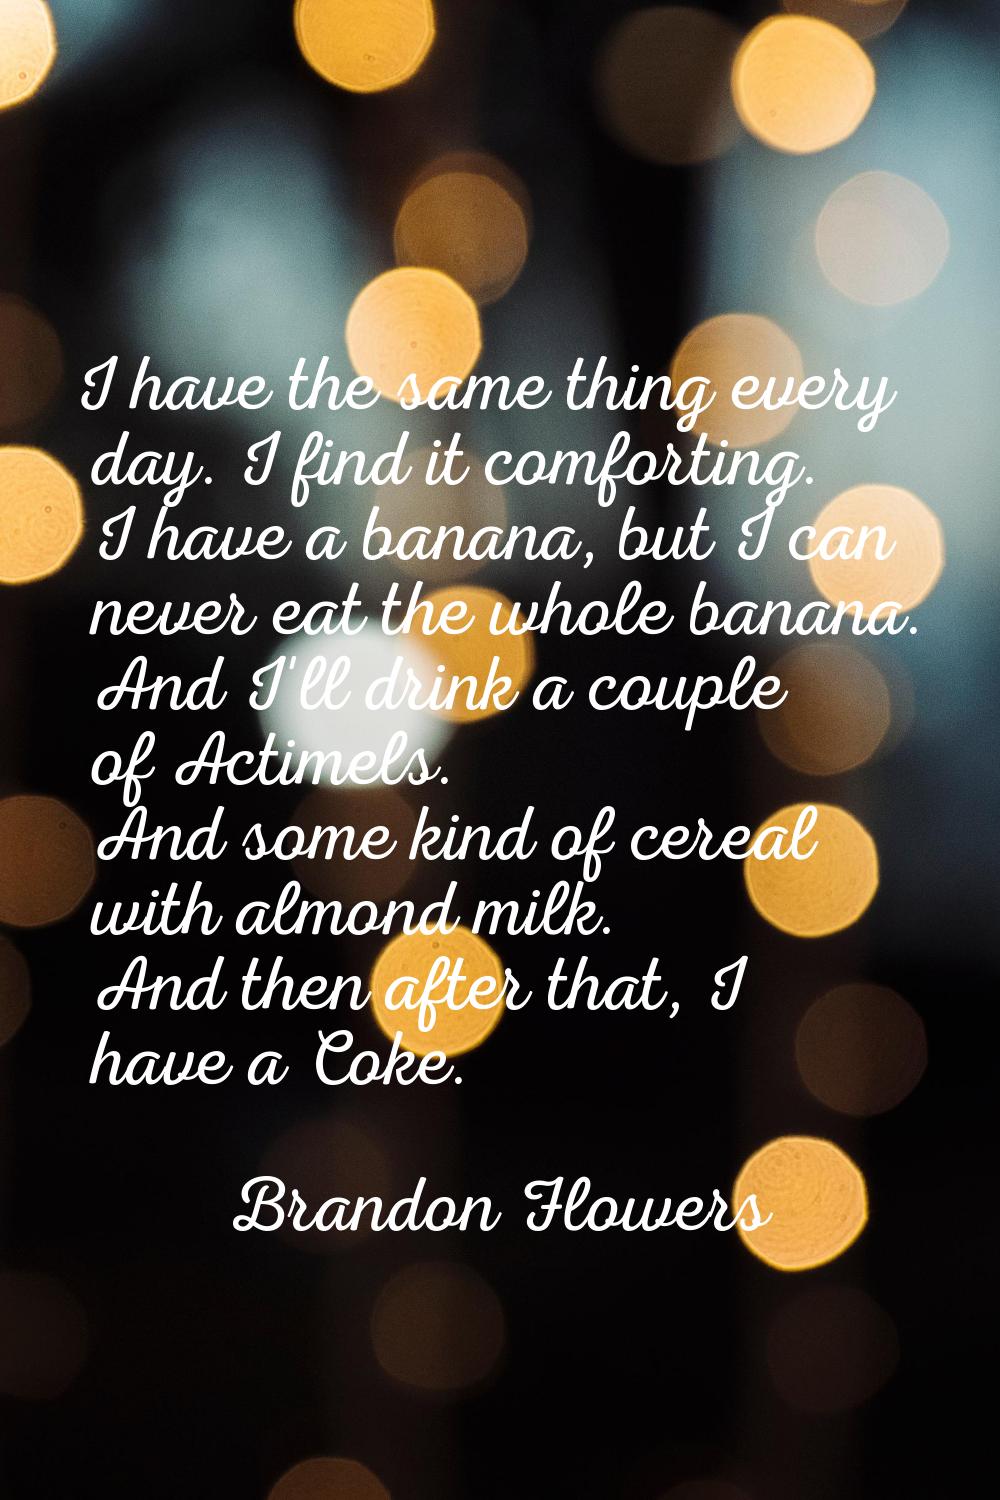 I have the same thing every day. I find it comforting. I have a banana, but I can never eat the who